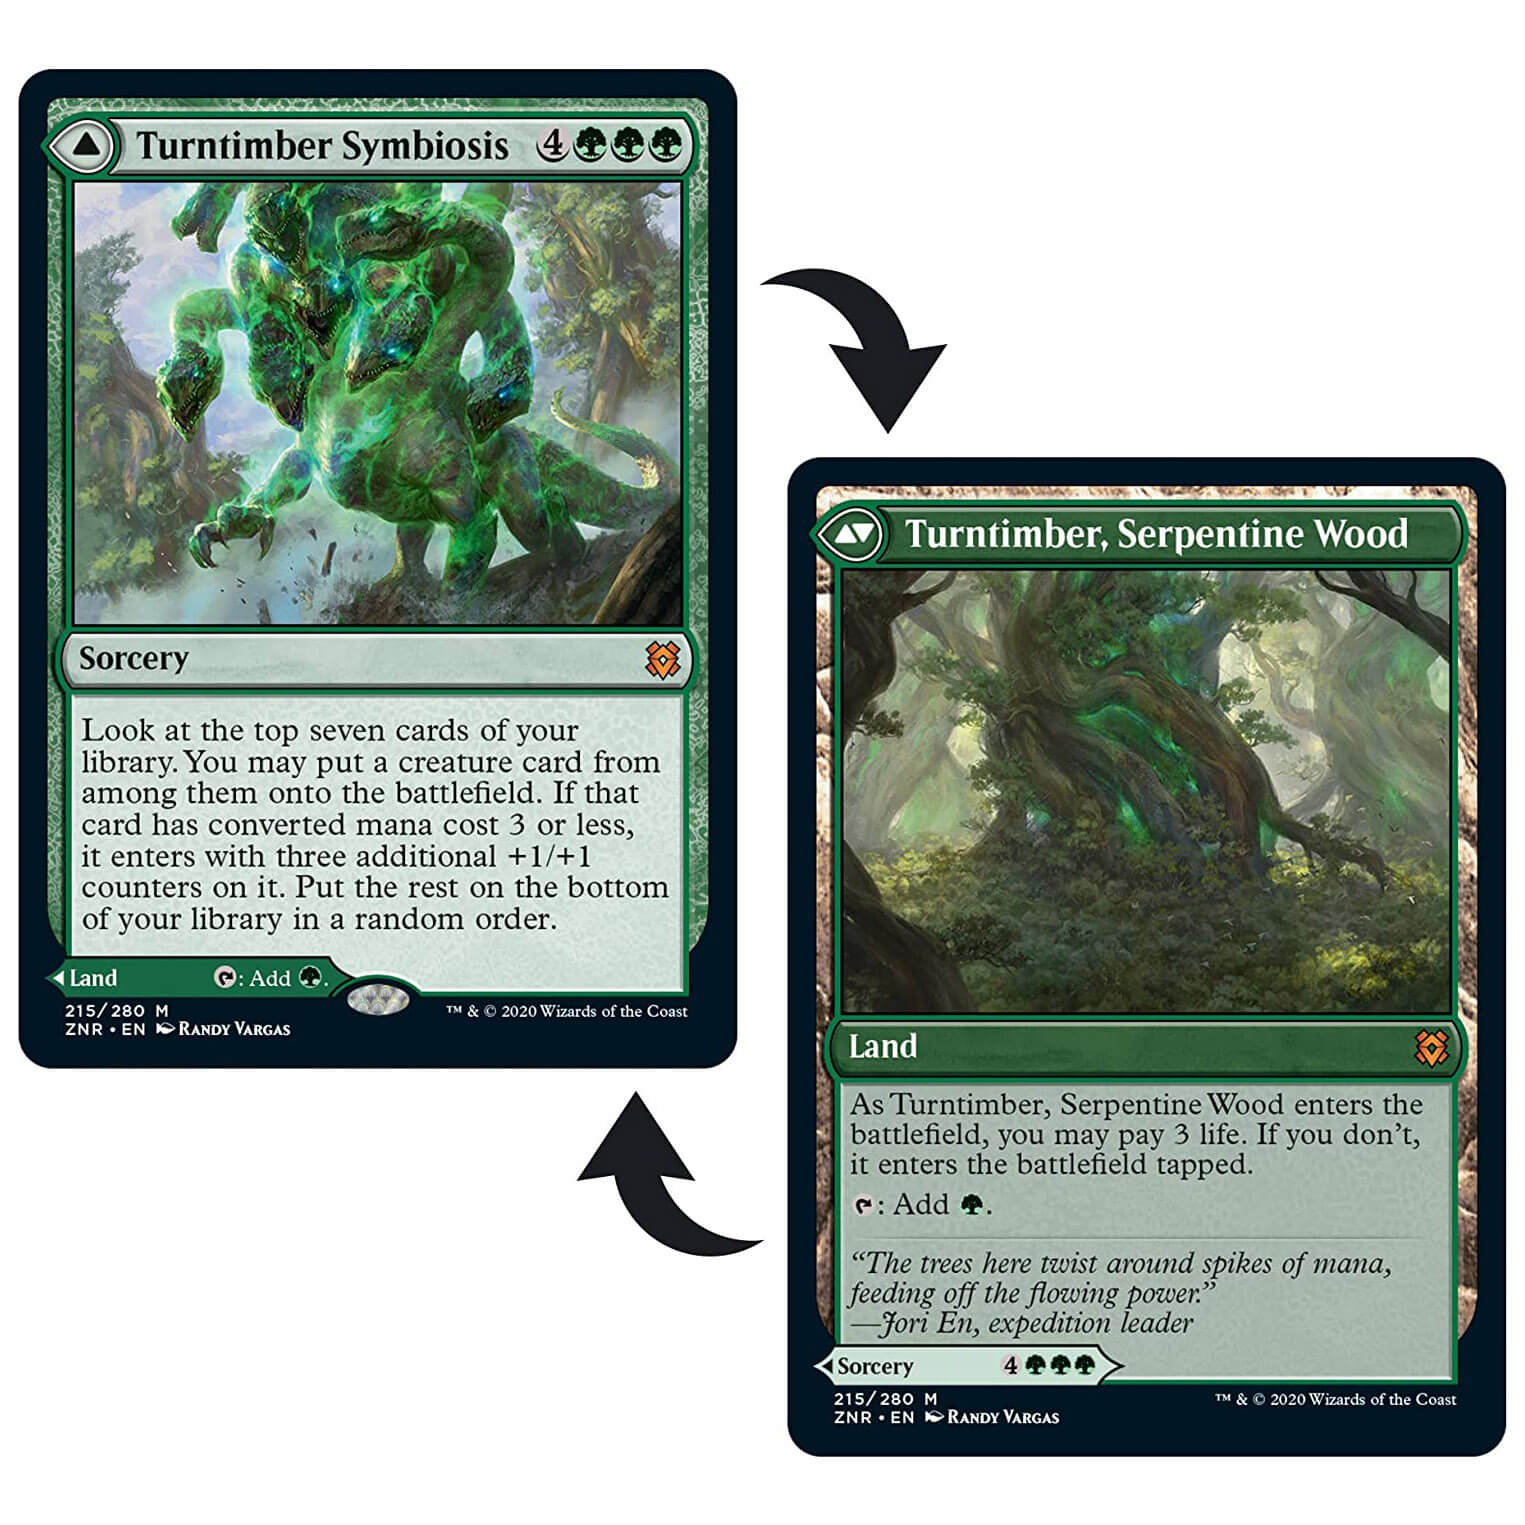 Magic the Gathering Challenger Deck 2021: Mono Green Stompy